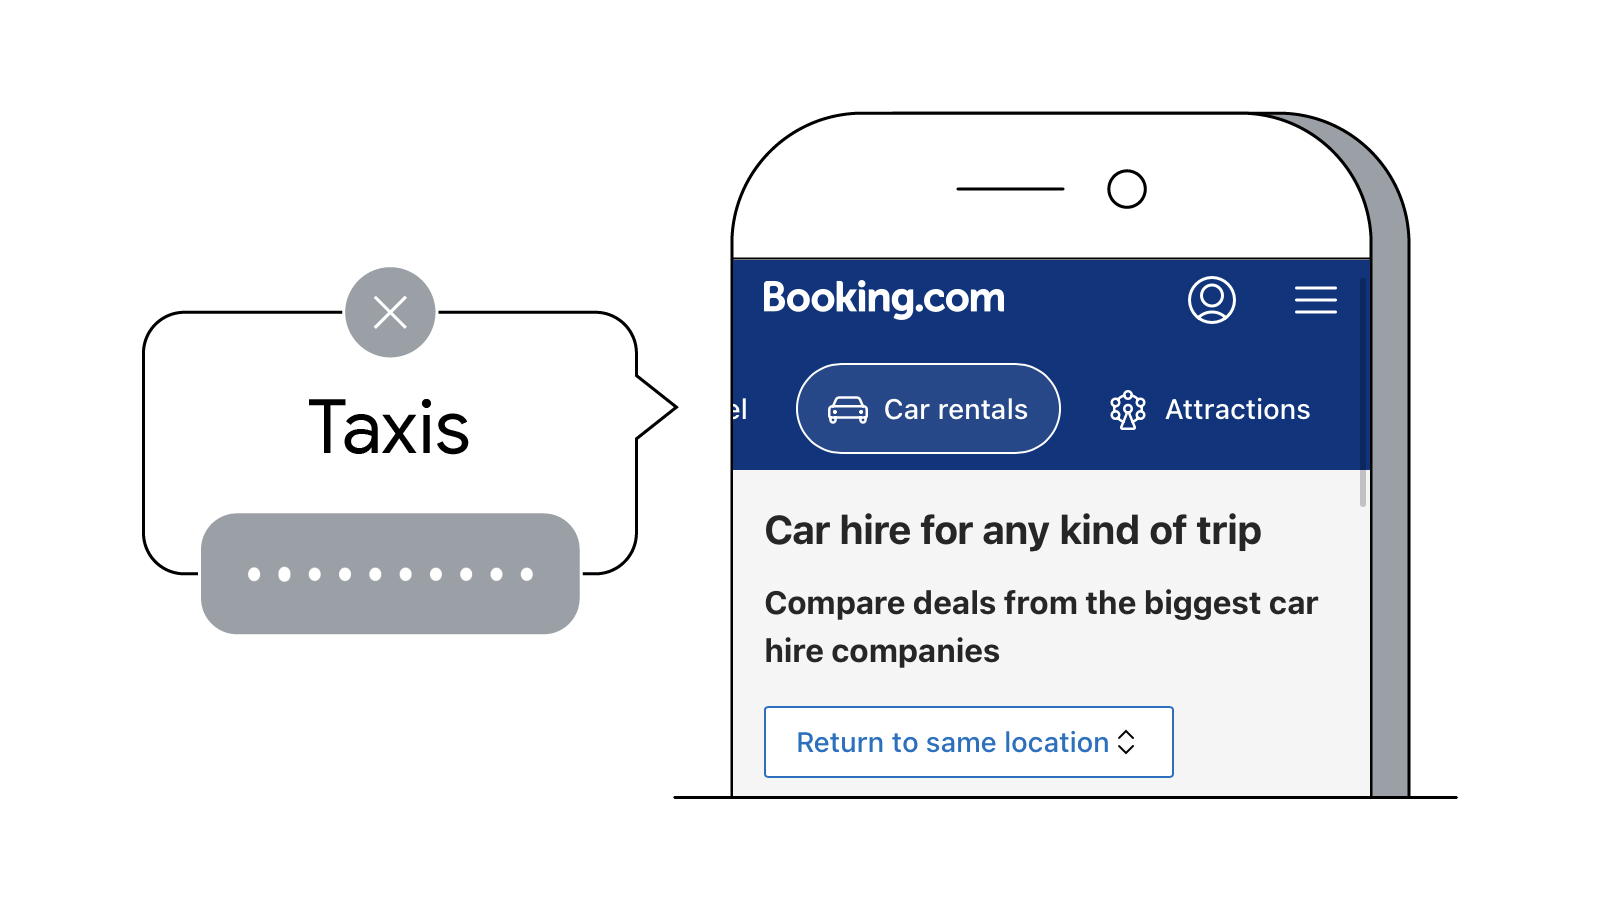 An animated gif showing a page from the Booking.com mobile website. The menu item “Car rentals” is highlighted, and there is a speech bubble to the right of the page saying “Taxis” with a cross and moving to “Car rentals” with a tick mark.